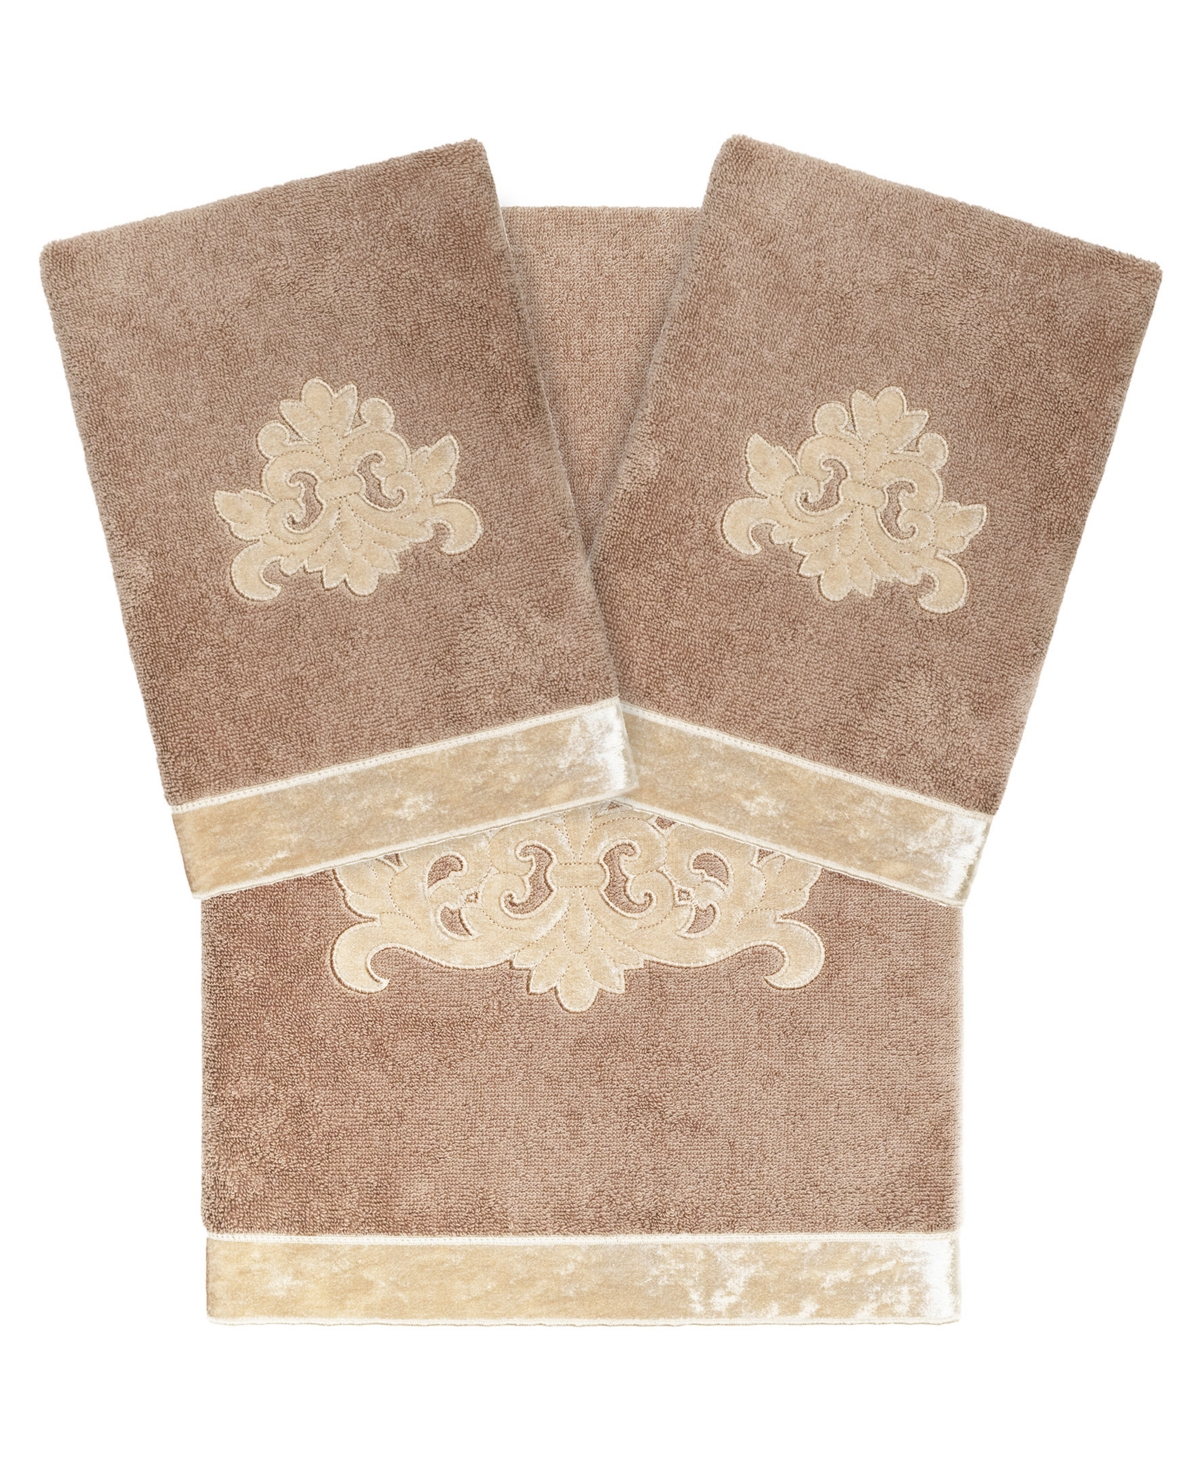 Linum Home Textiles Turkish Cotton May Embellished Towel Set, 3 Piece Bedding In Cocoa